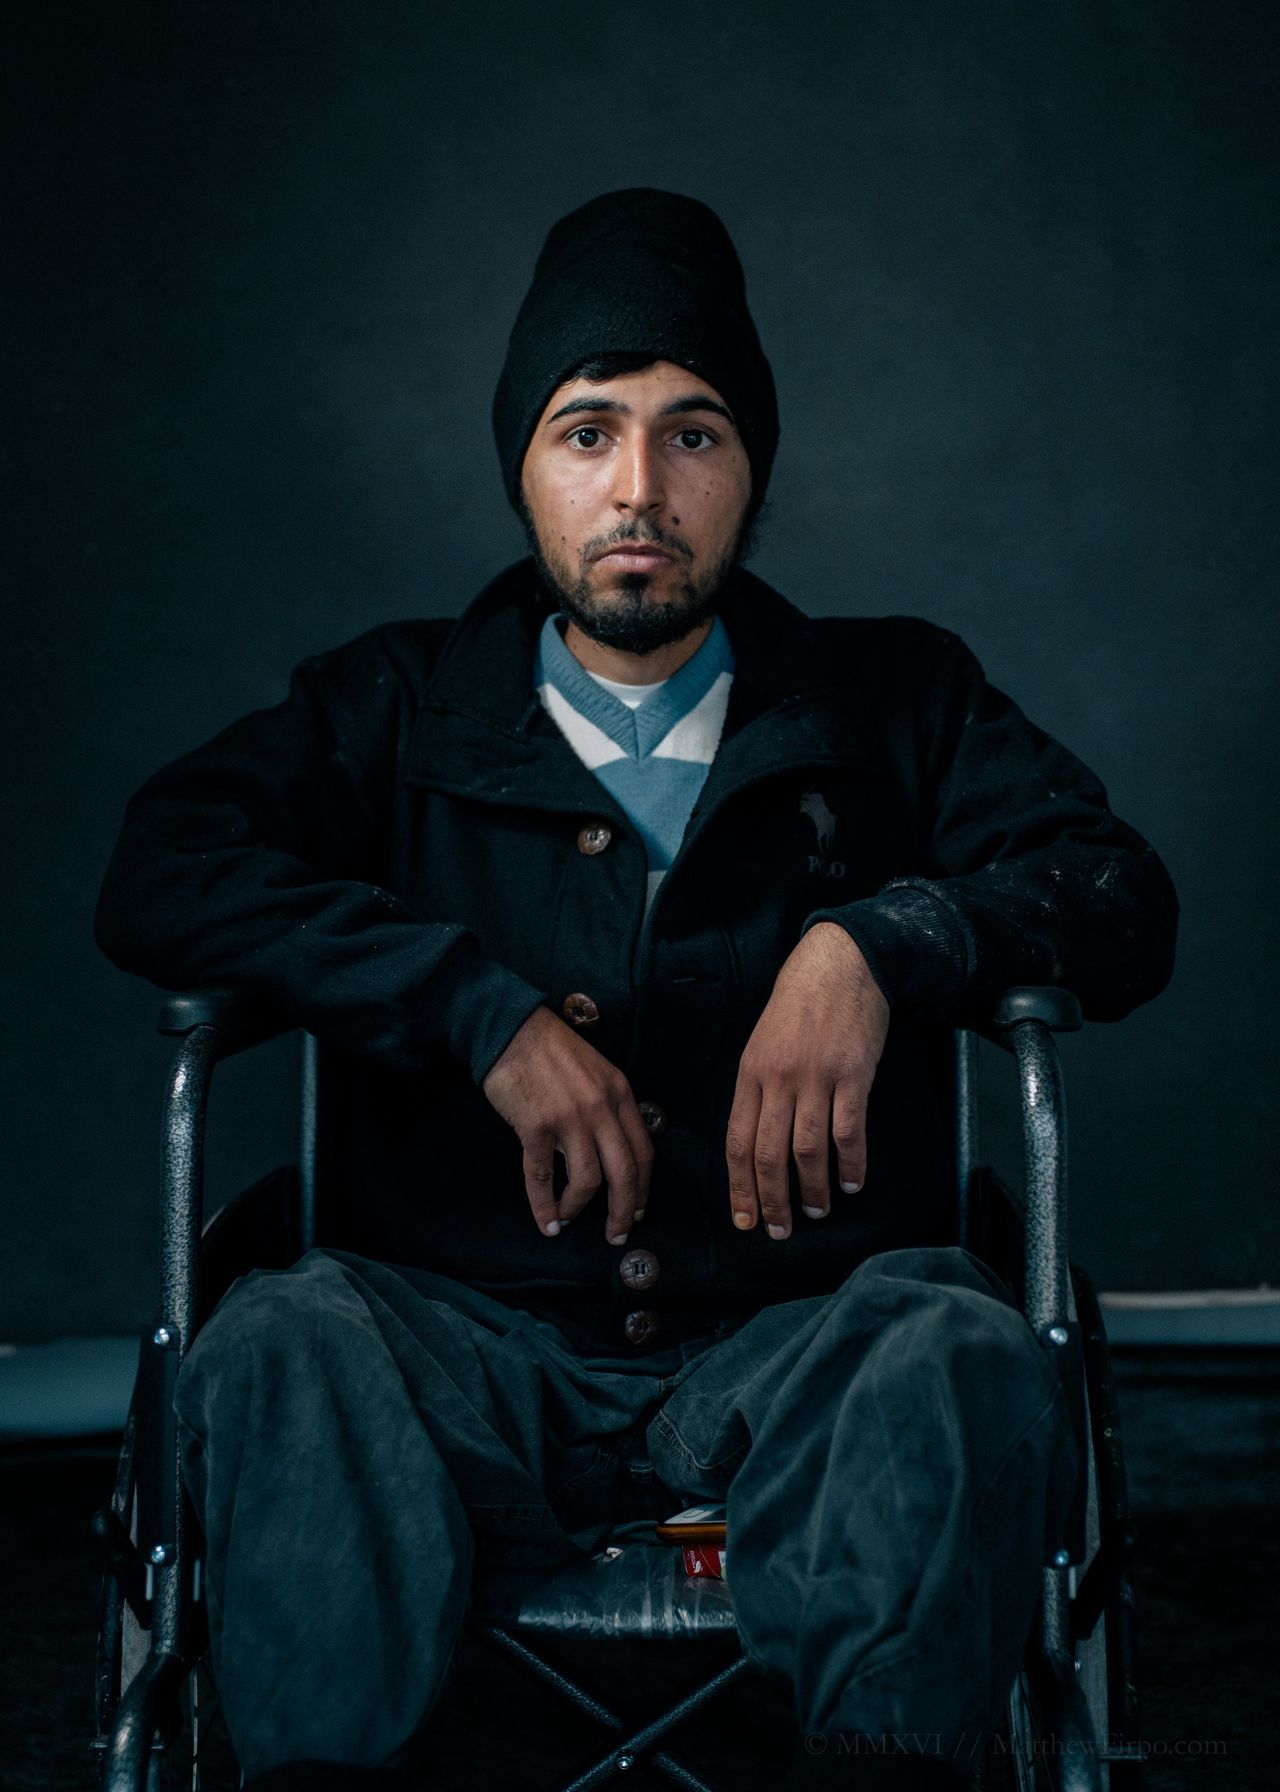 Hamad was born with a degenerative muscle condition. Given the choice between leaving his wheelchair, or being left behind, Hamad said he climbed aboard a raft on his hands and knees. After three hours of prayers and the hum of the engines, he found himself lifted out of the boat and onto European soil. "In Syria, I was nothing," he said. He hopes for a more promising future elsewhere.